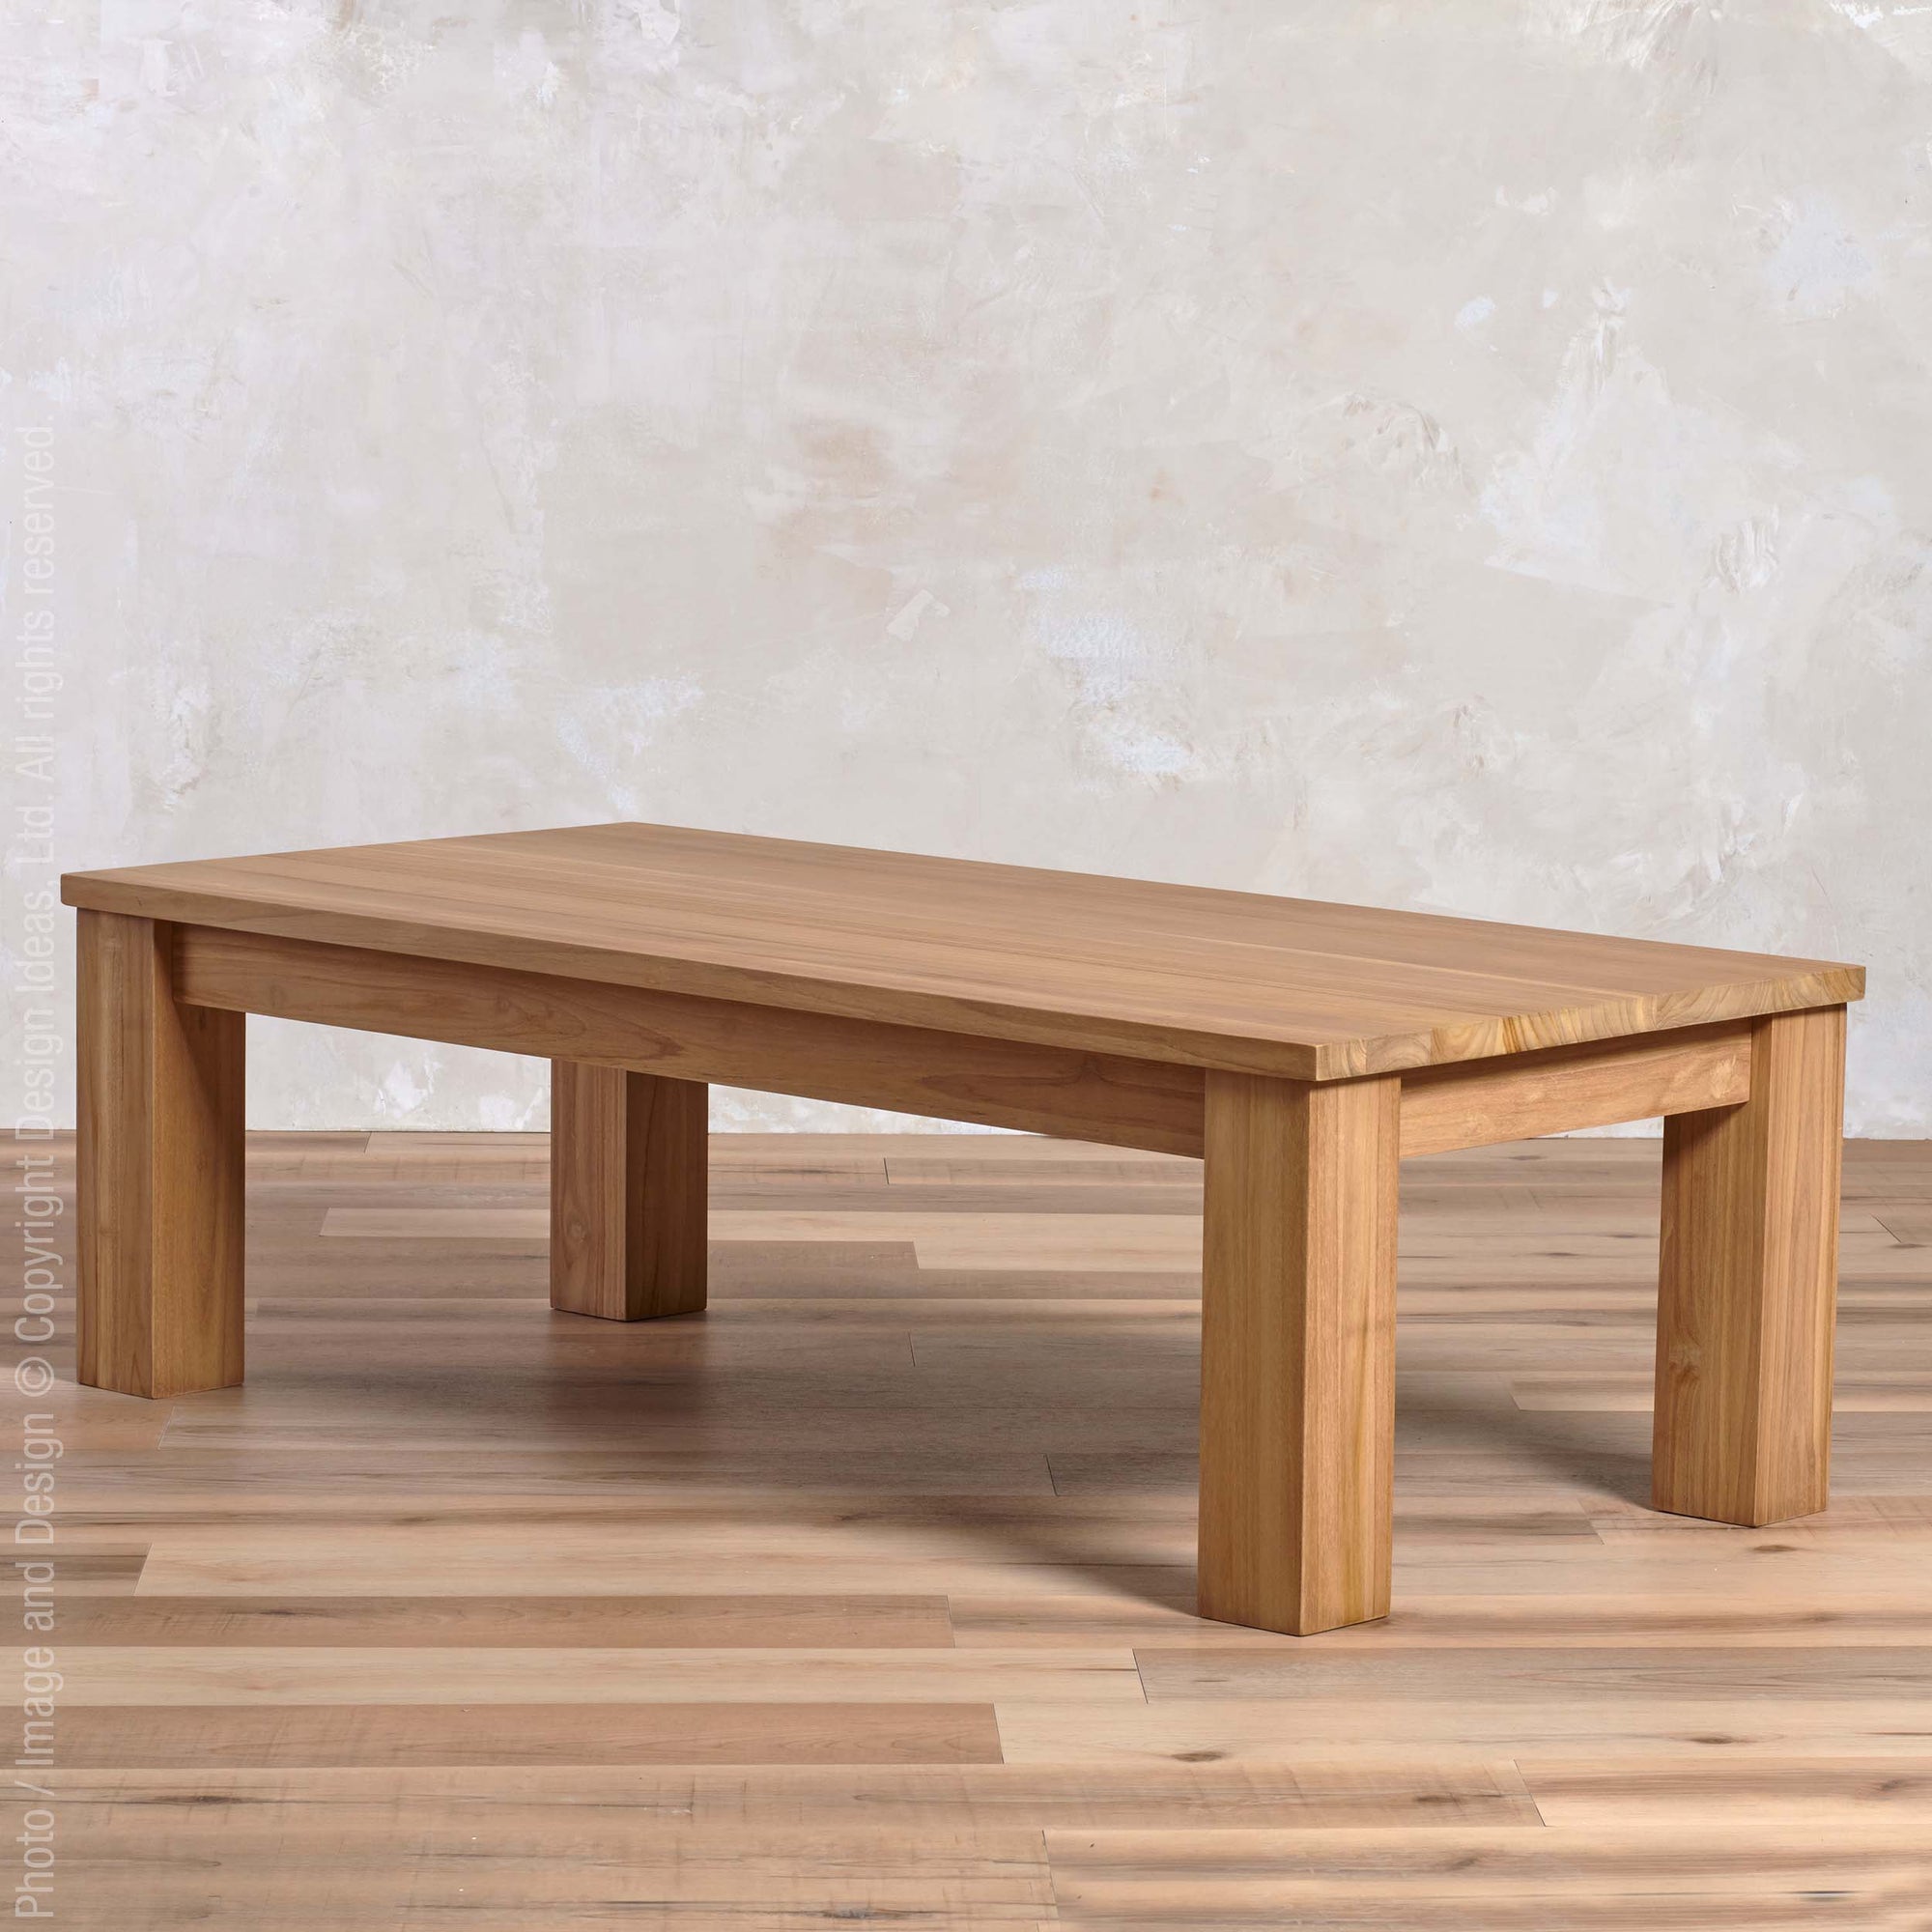 Takara™ Teak Rectanglar Coffee Table | Image 3 | From the Takara Collection | Elegantly made with natural teak for long lasting use | Available in natural color | texxture home